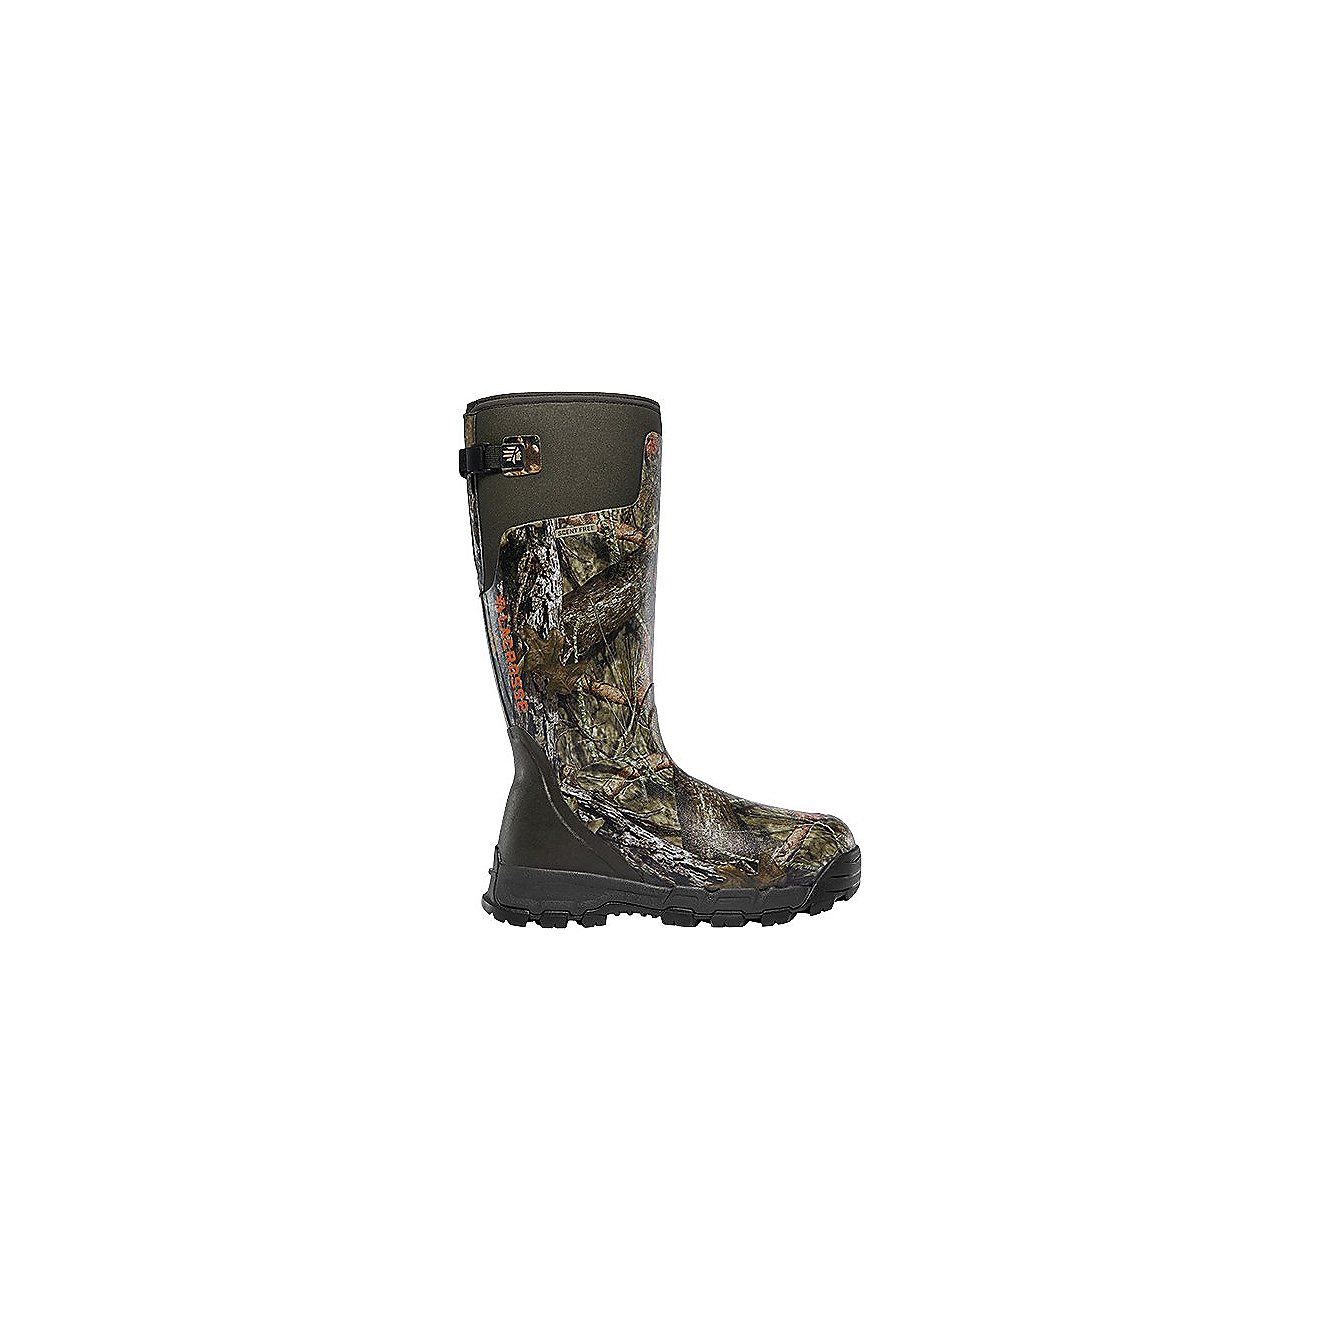 LaCrosse Men's Alphaburly Pro 18 in 1000 g Hunting Boots                                                                         - view number 1